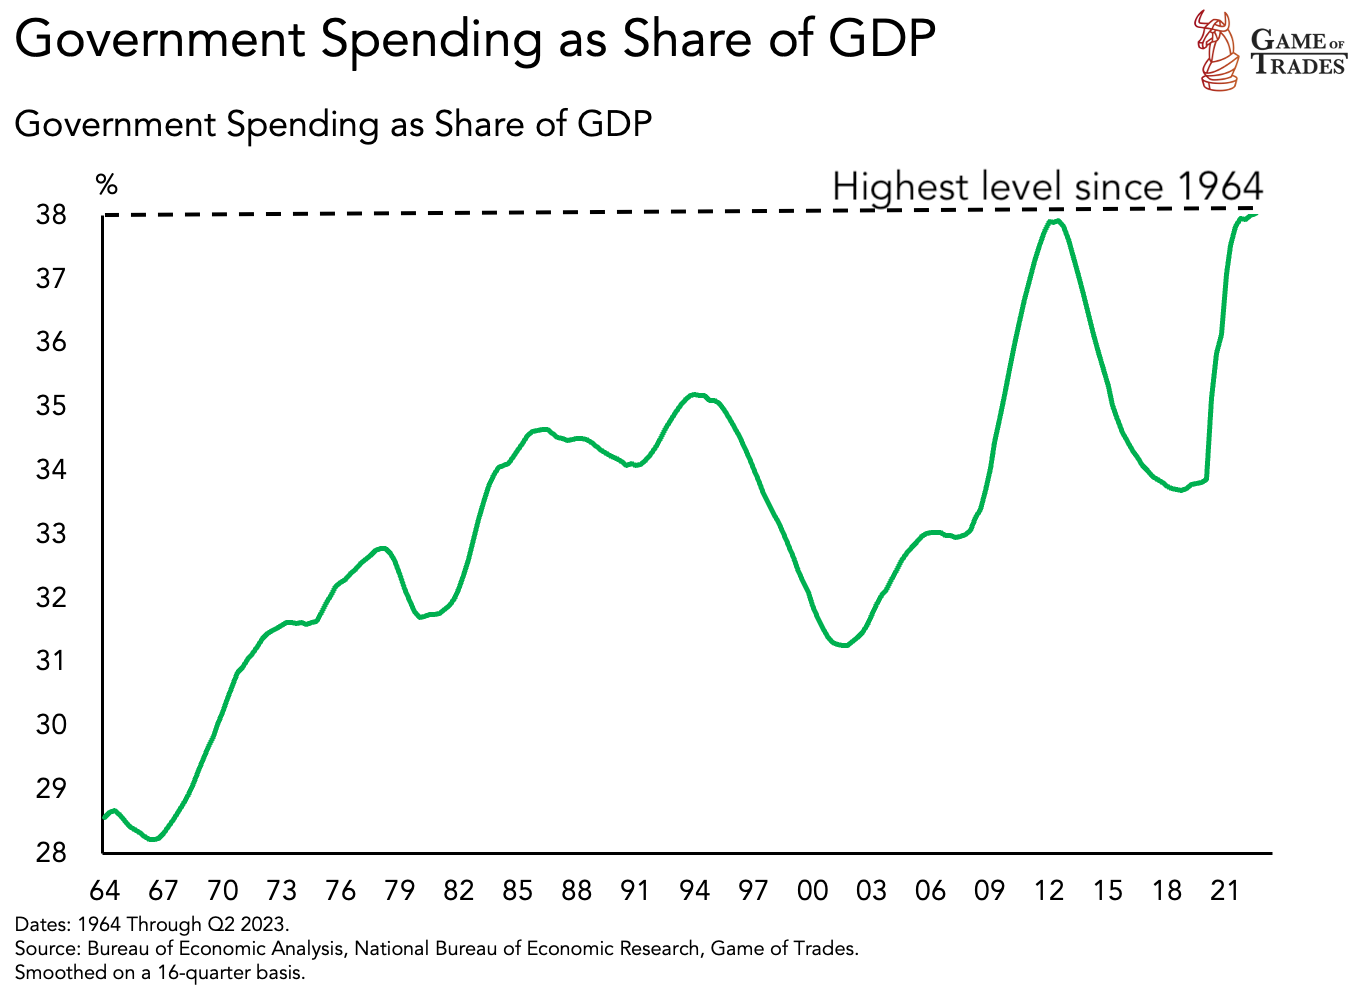 Government spending as share of GDP